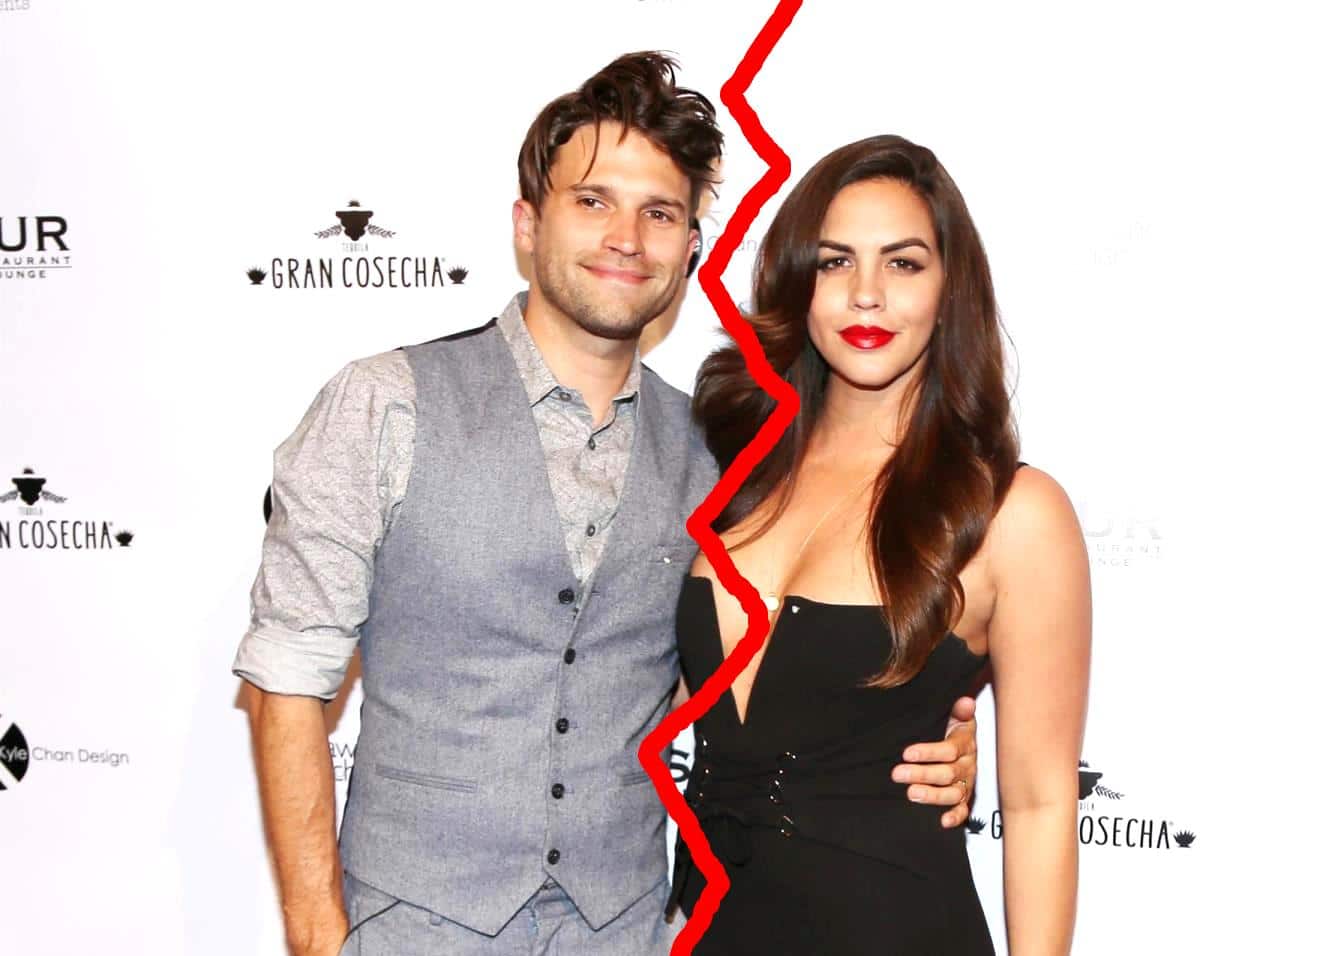 REPORT: Pump Rules' Katie Maloney Served Tom Schwartz With Divorce Papers at Their Home, is Representing Herself Amid Split as Tom is Yet to Respond